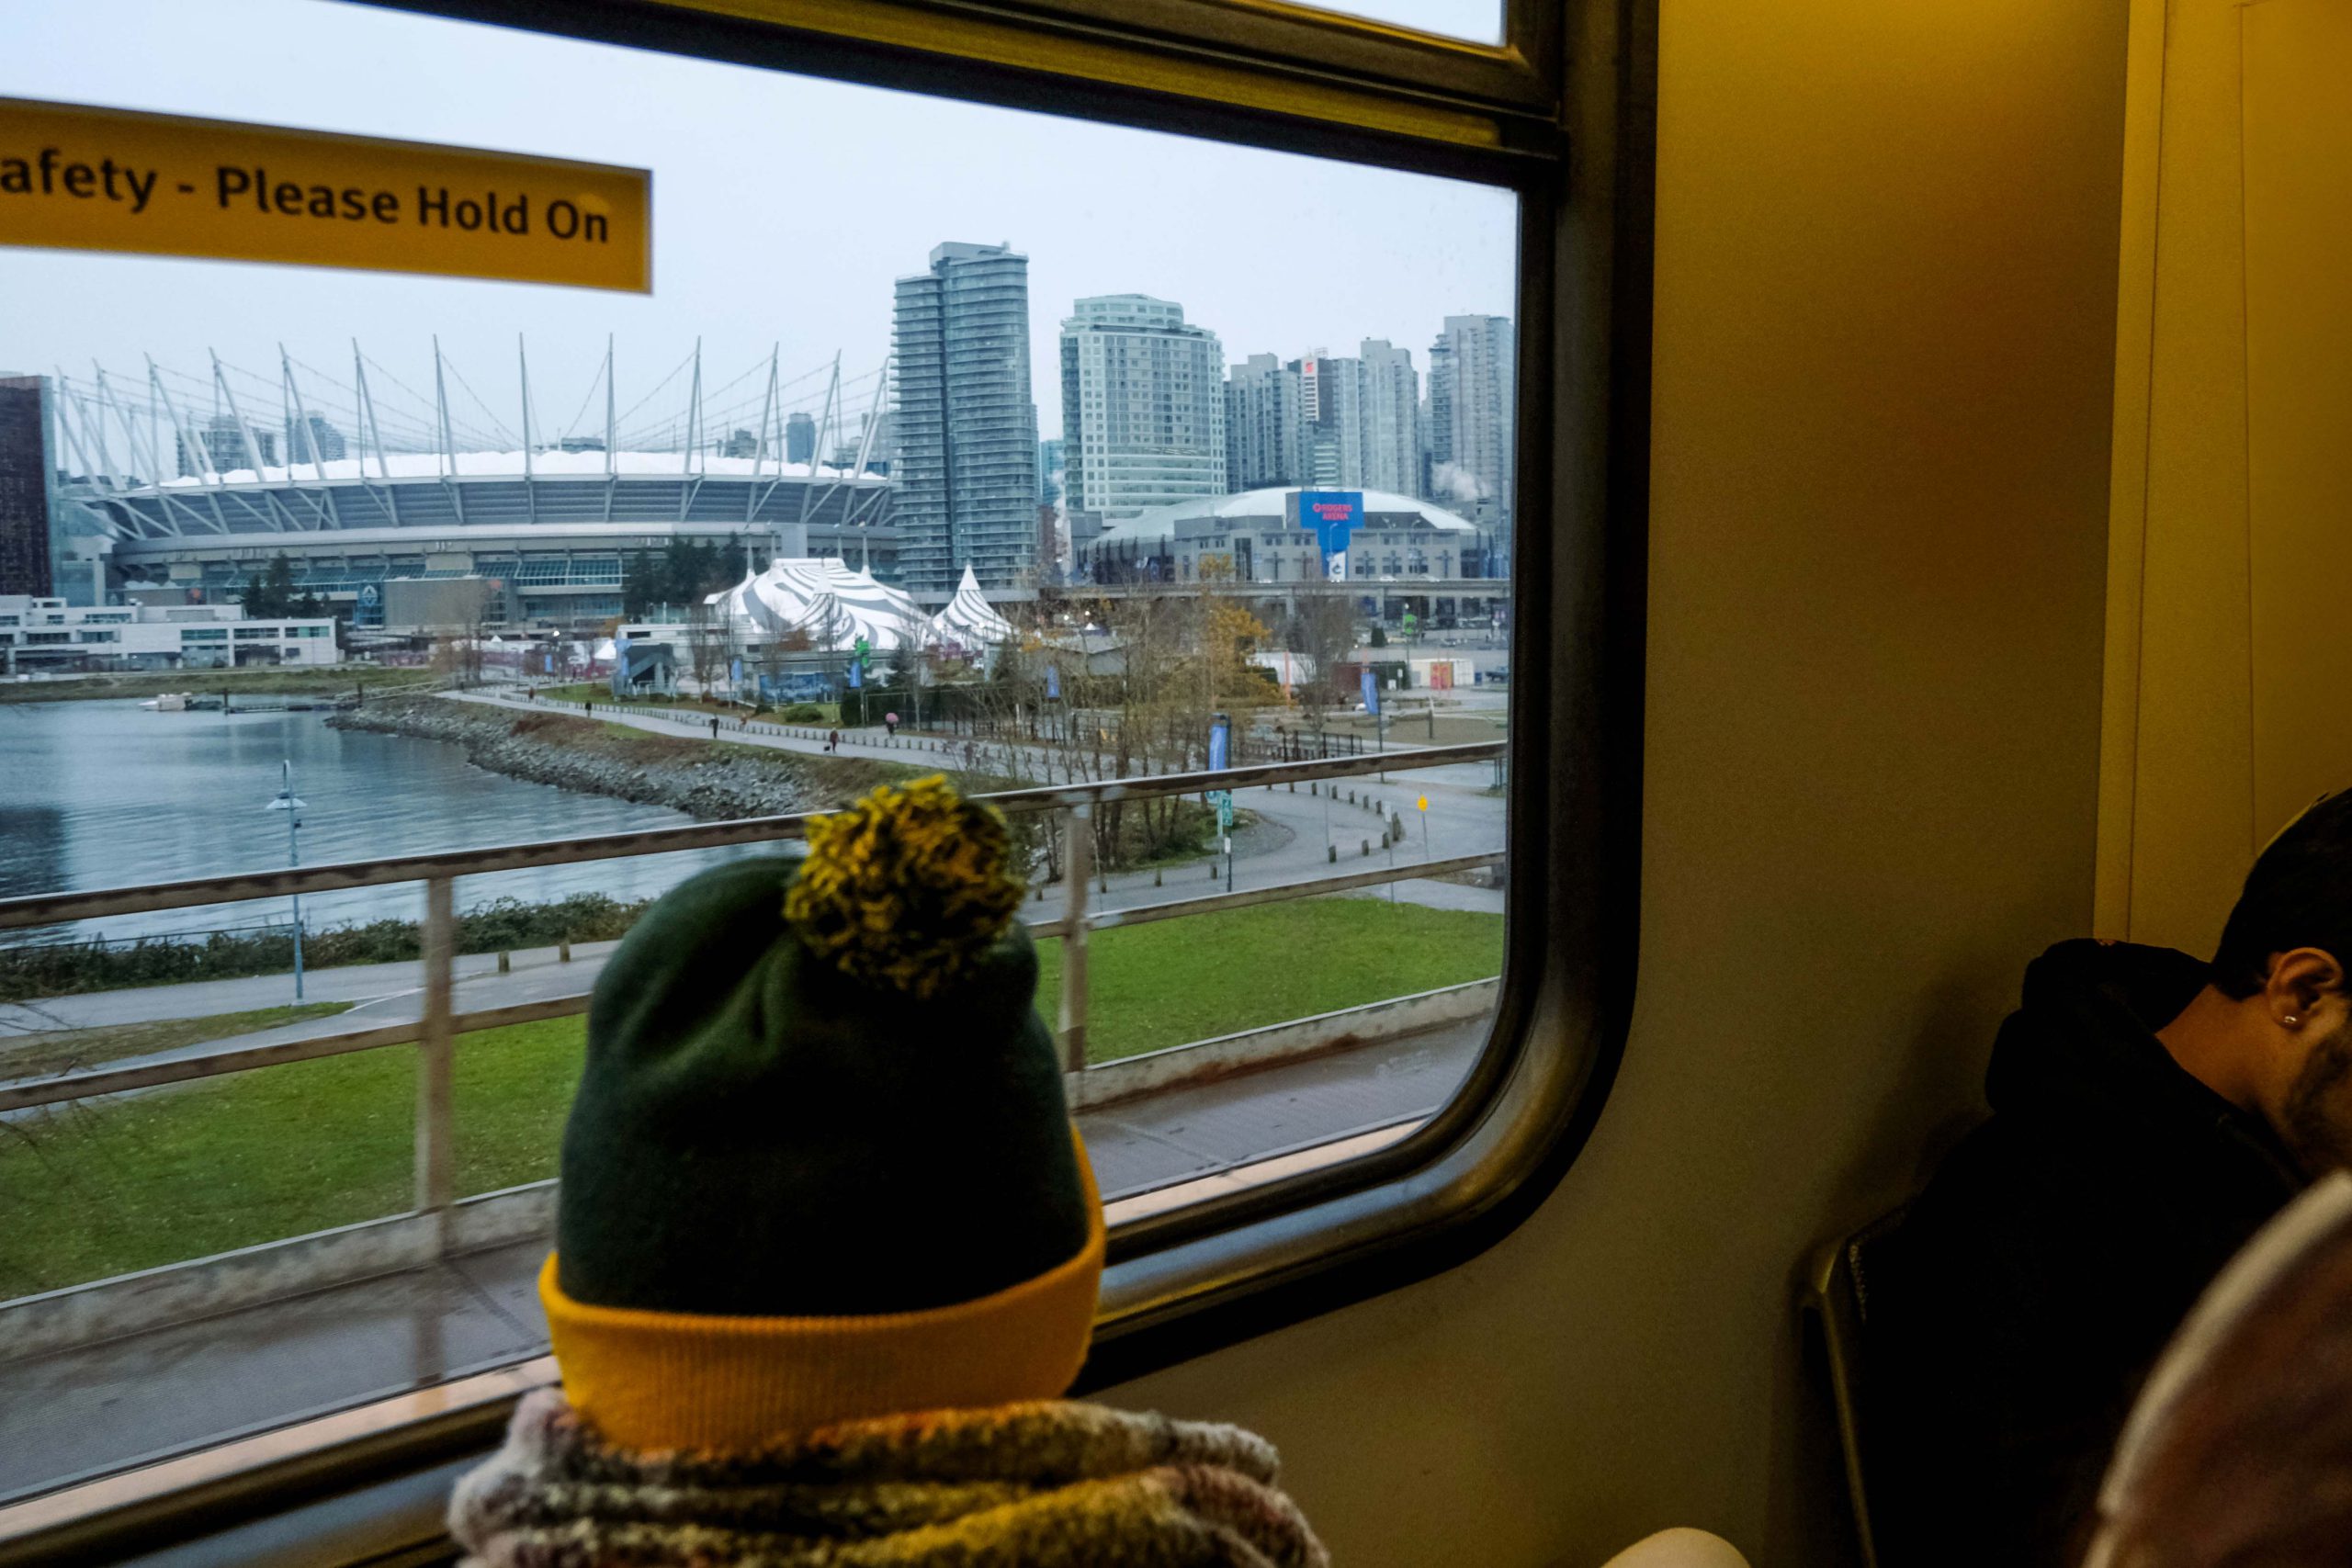 View from the SkyTrain window of the Cirque du Soleil's Big Top